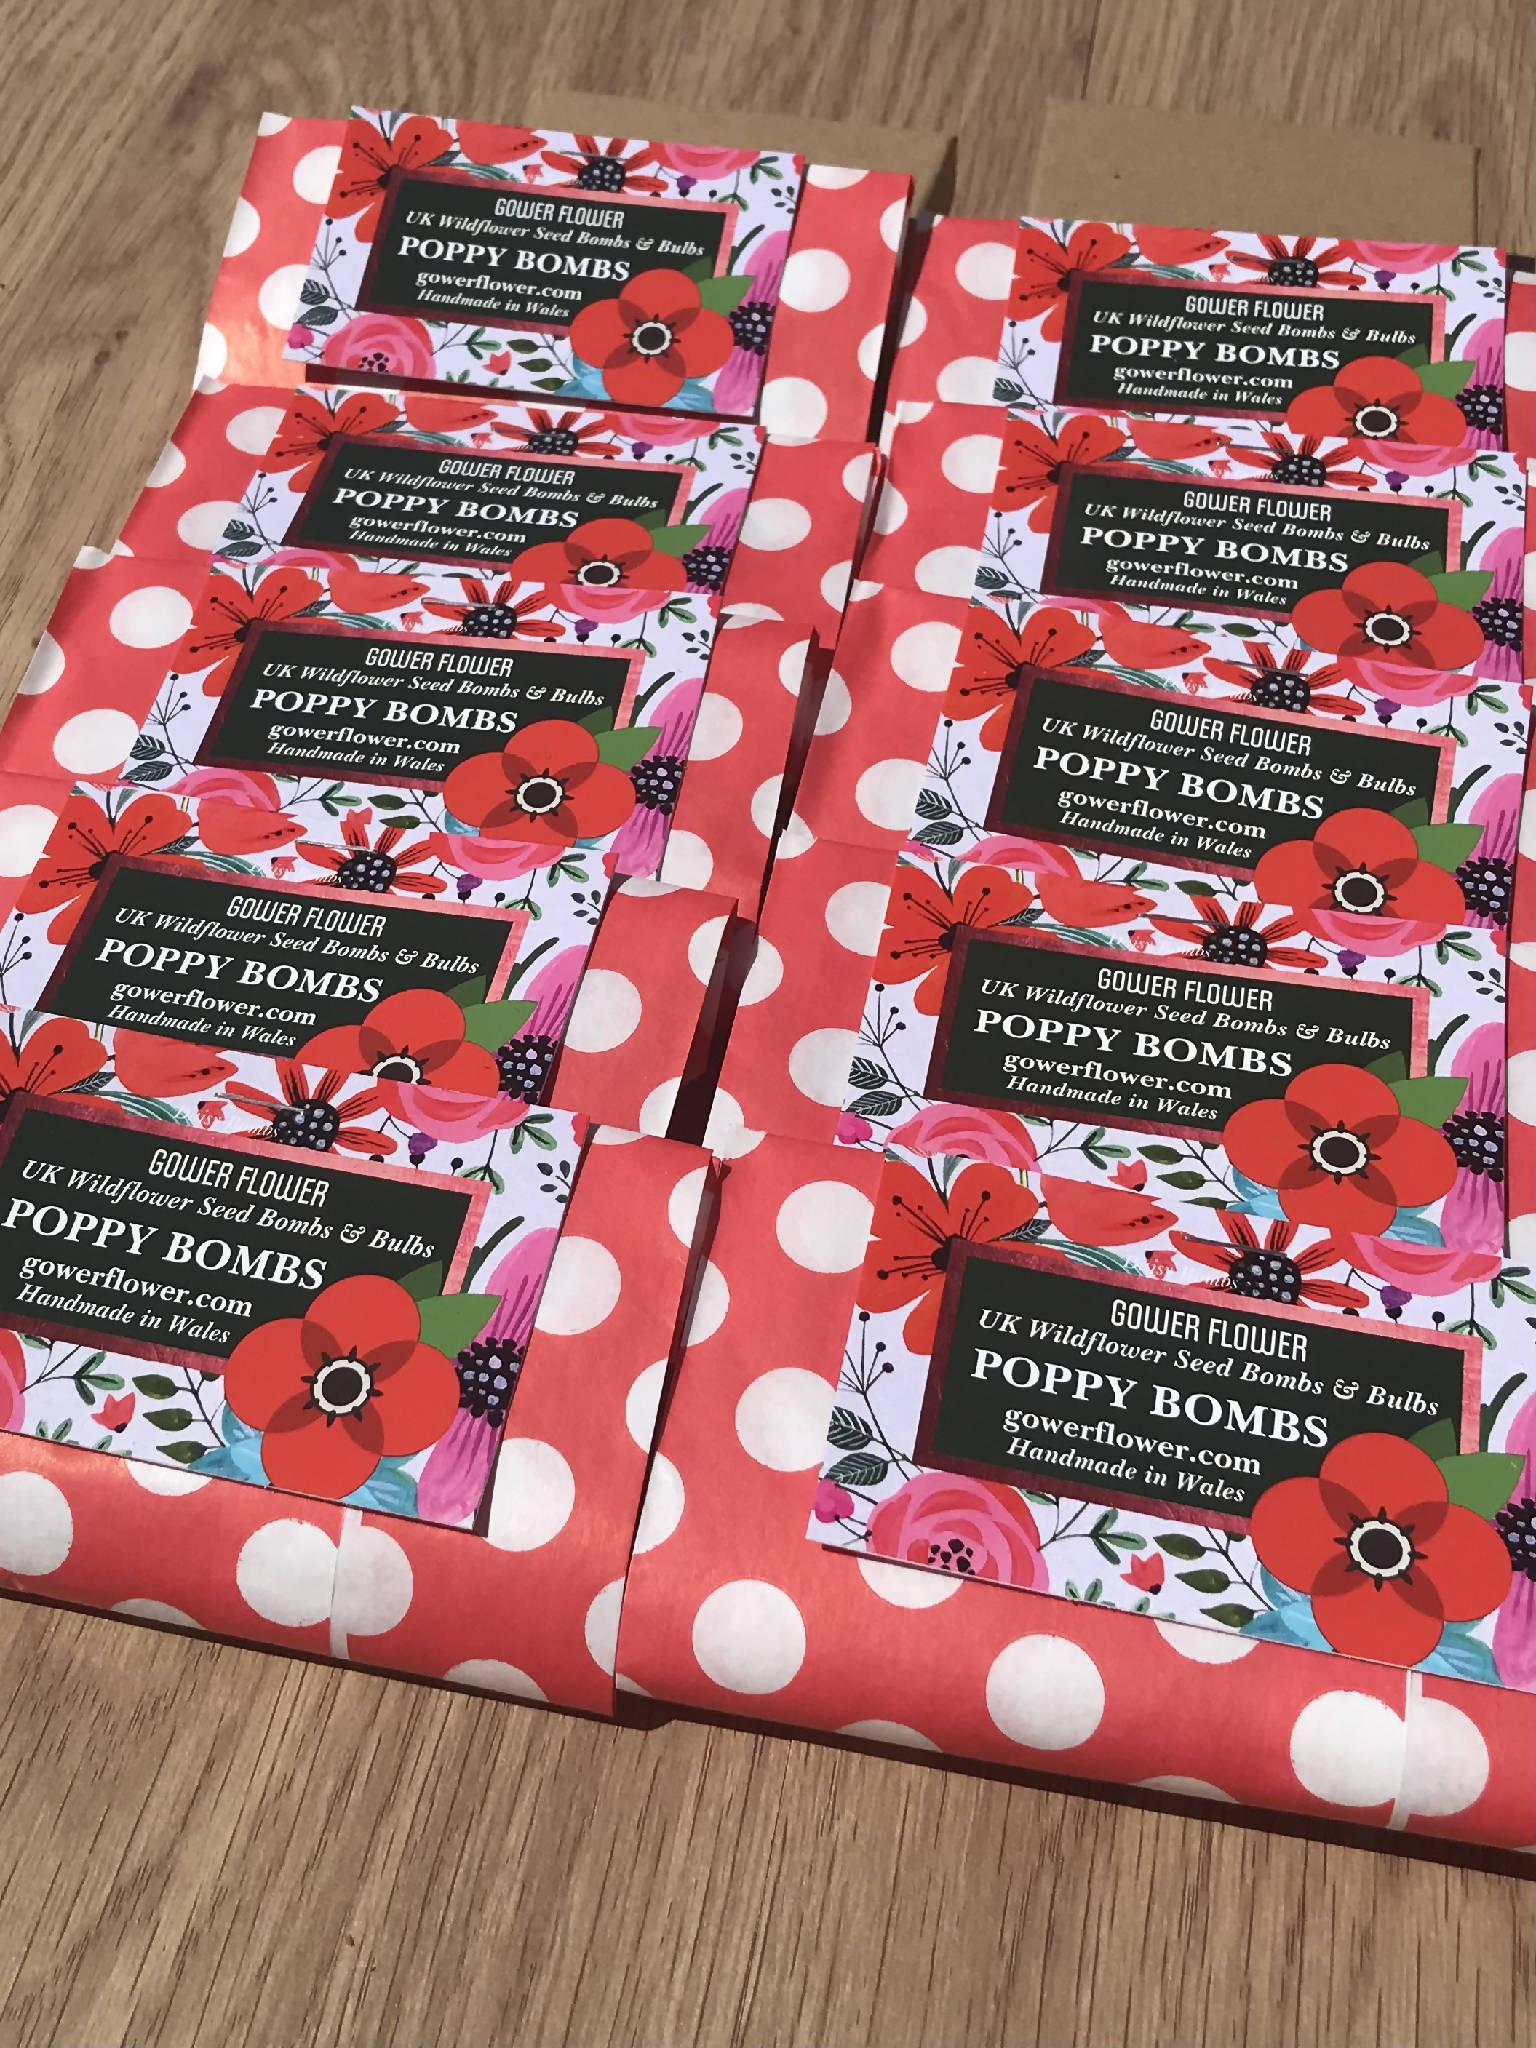 Poppy Seed Bomb Party Pack - 5 or 10 packets available. Each packet has 4 bombs and a product/instruction card